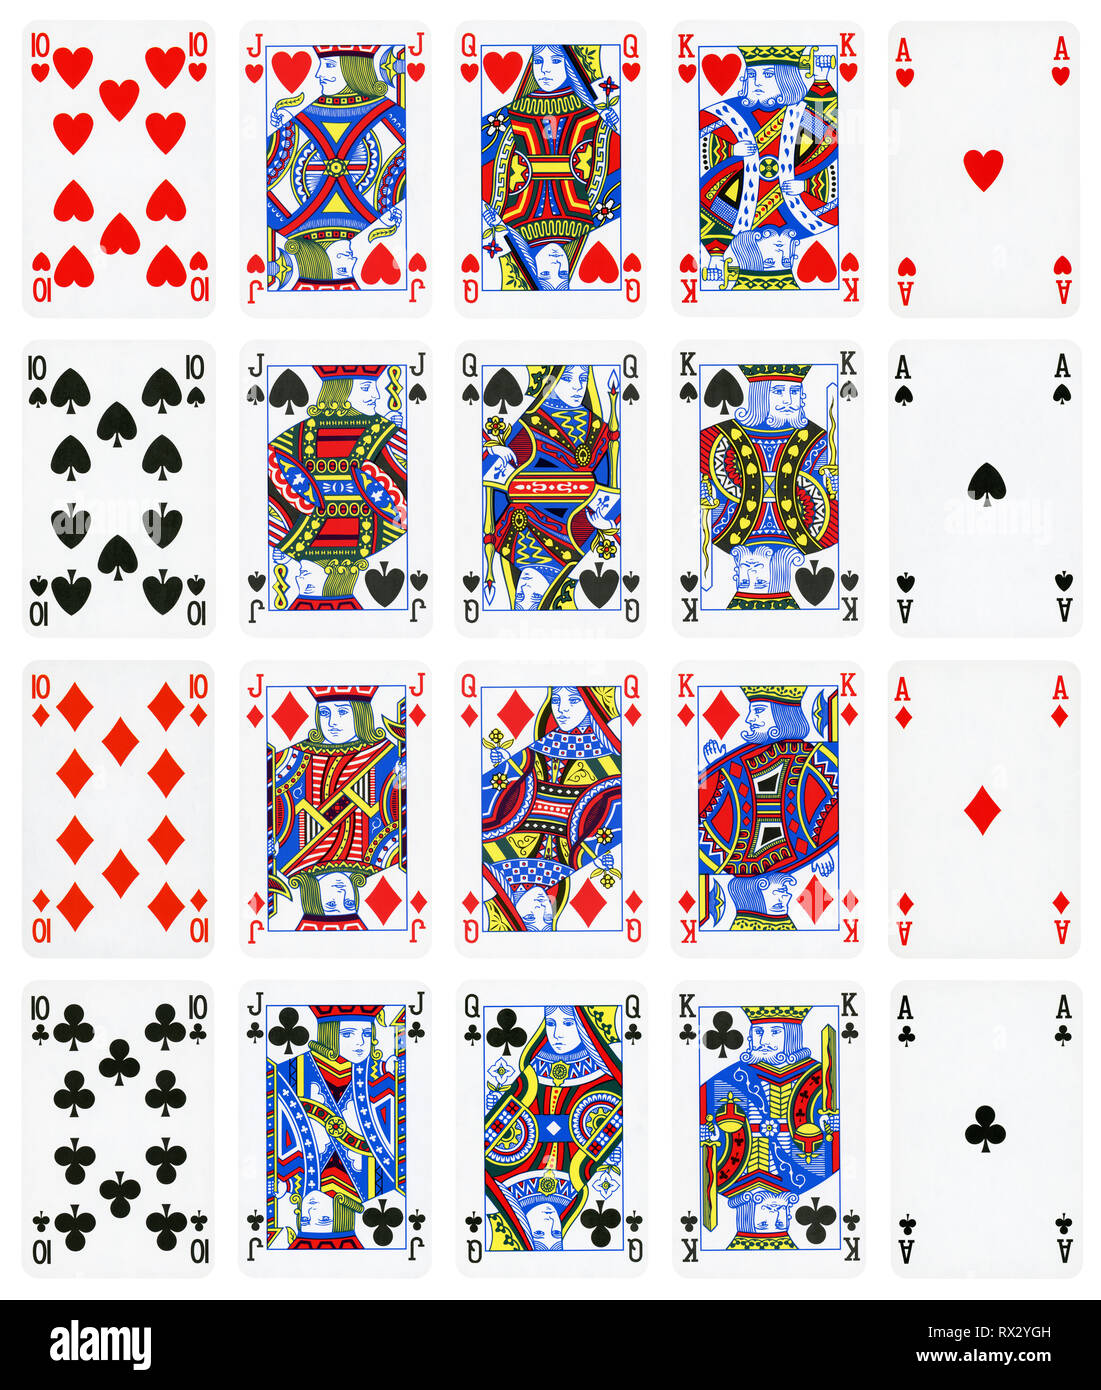 The Jack, Queen and King in Playing Cards – Decksrock